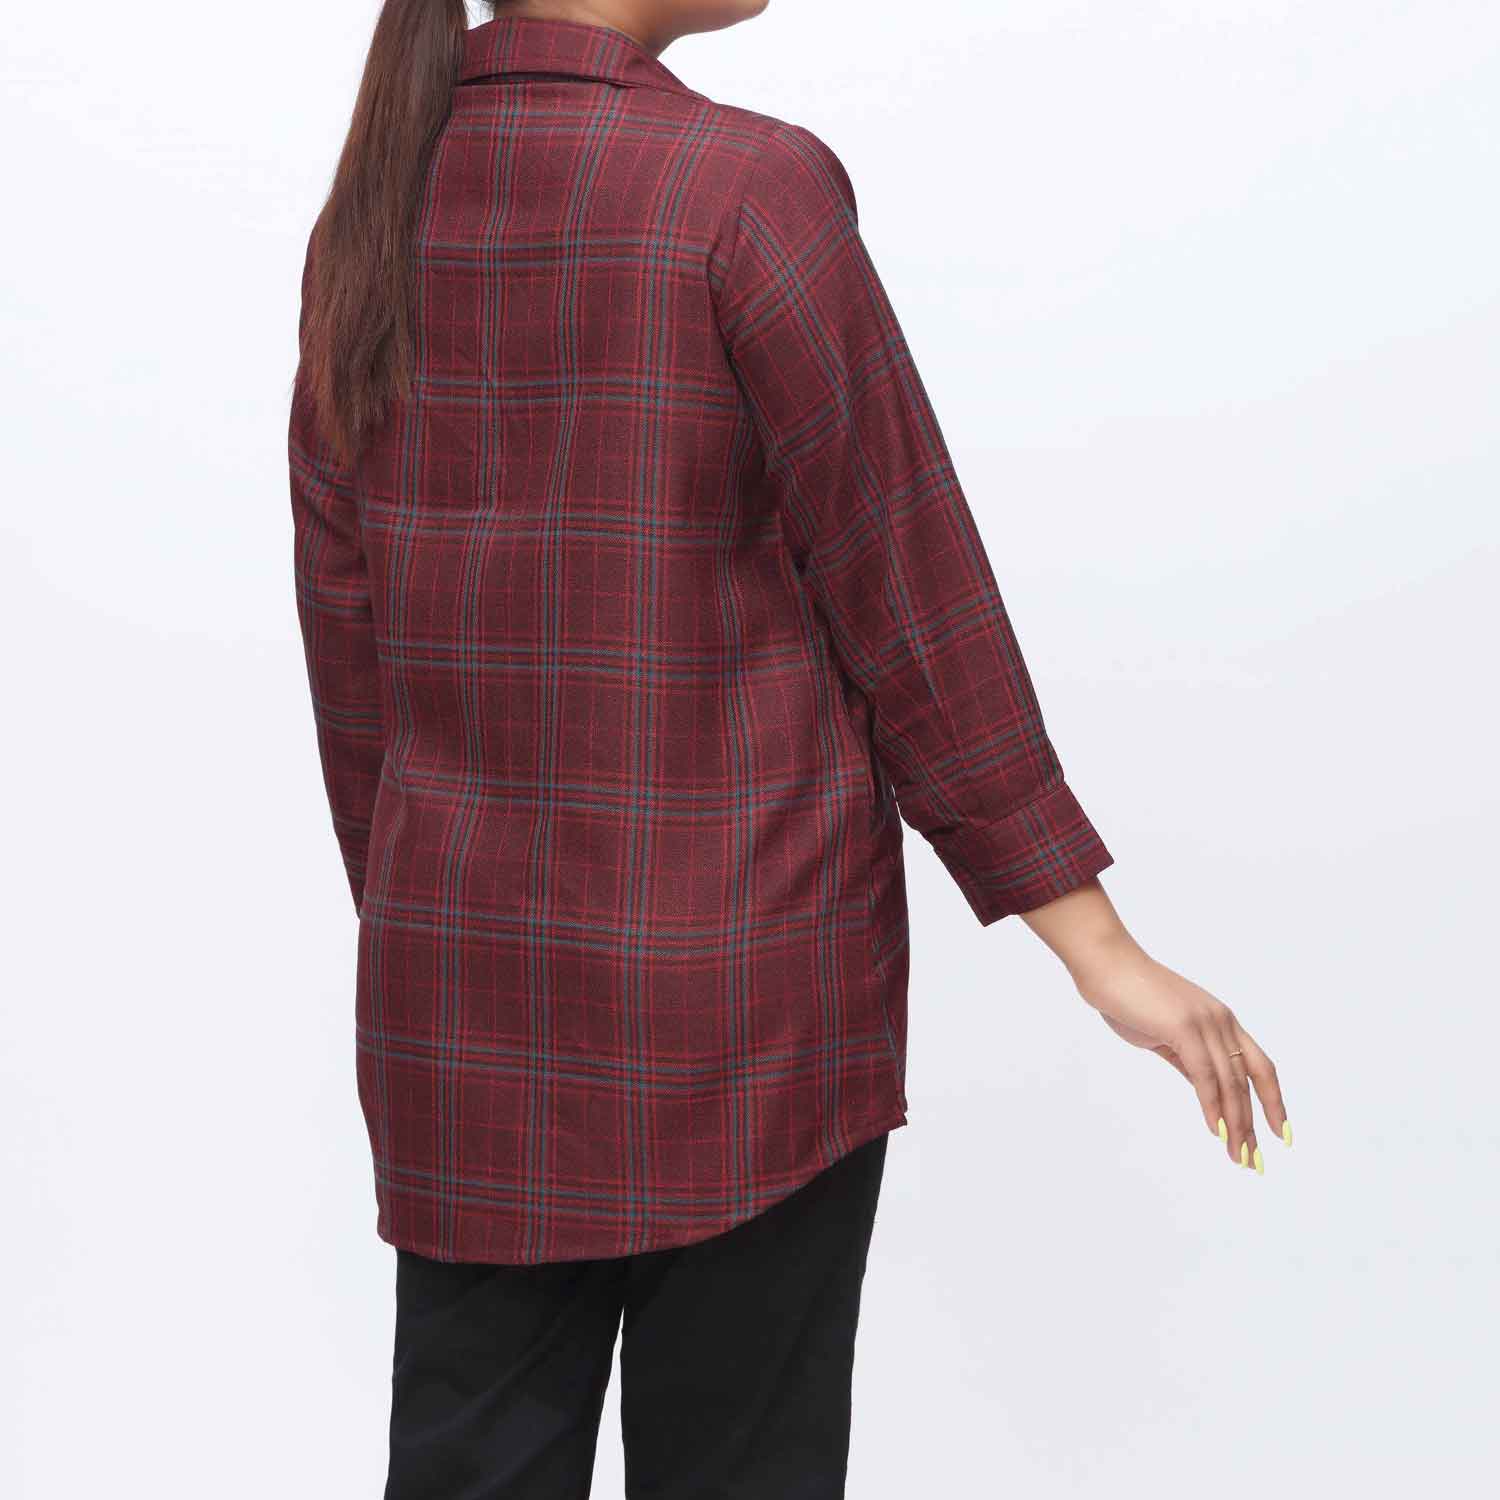 1PC- Flannel Checkered Top PW3265